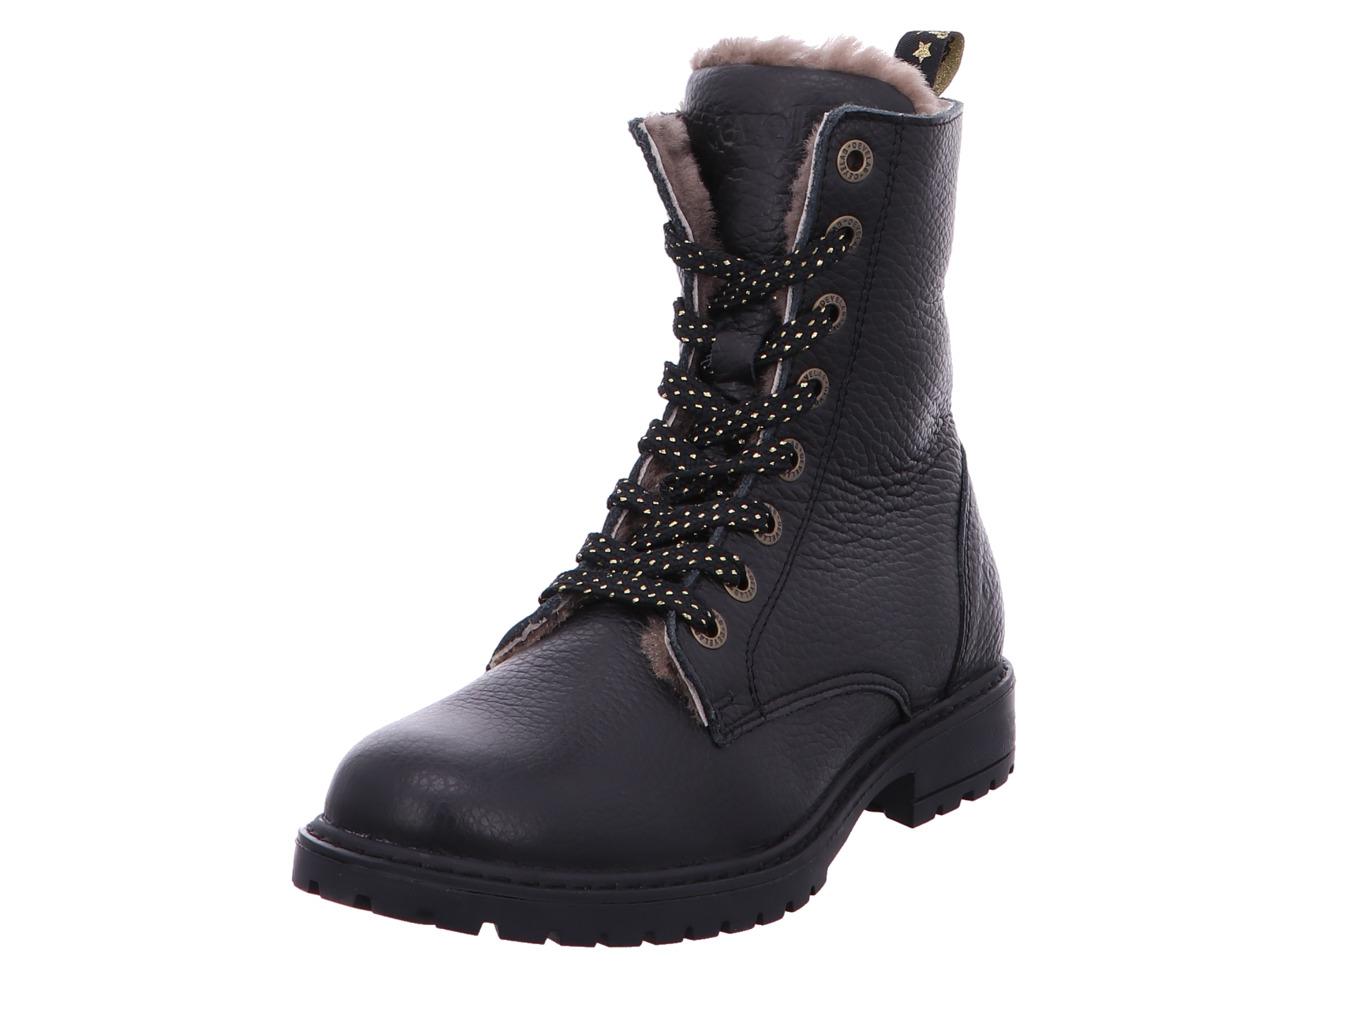 develab_girls_mid_boot_laces_42846_922_1143